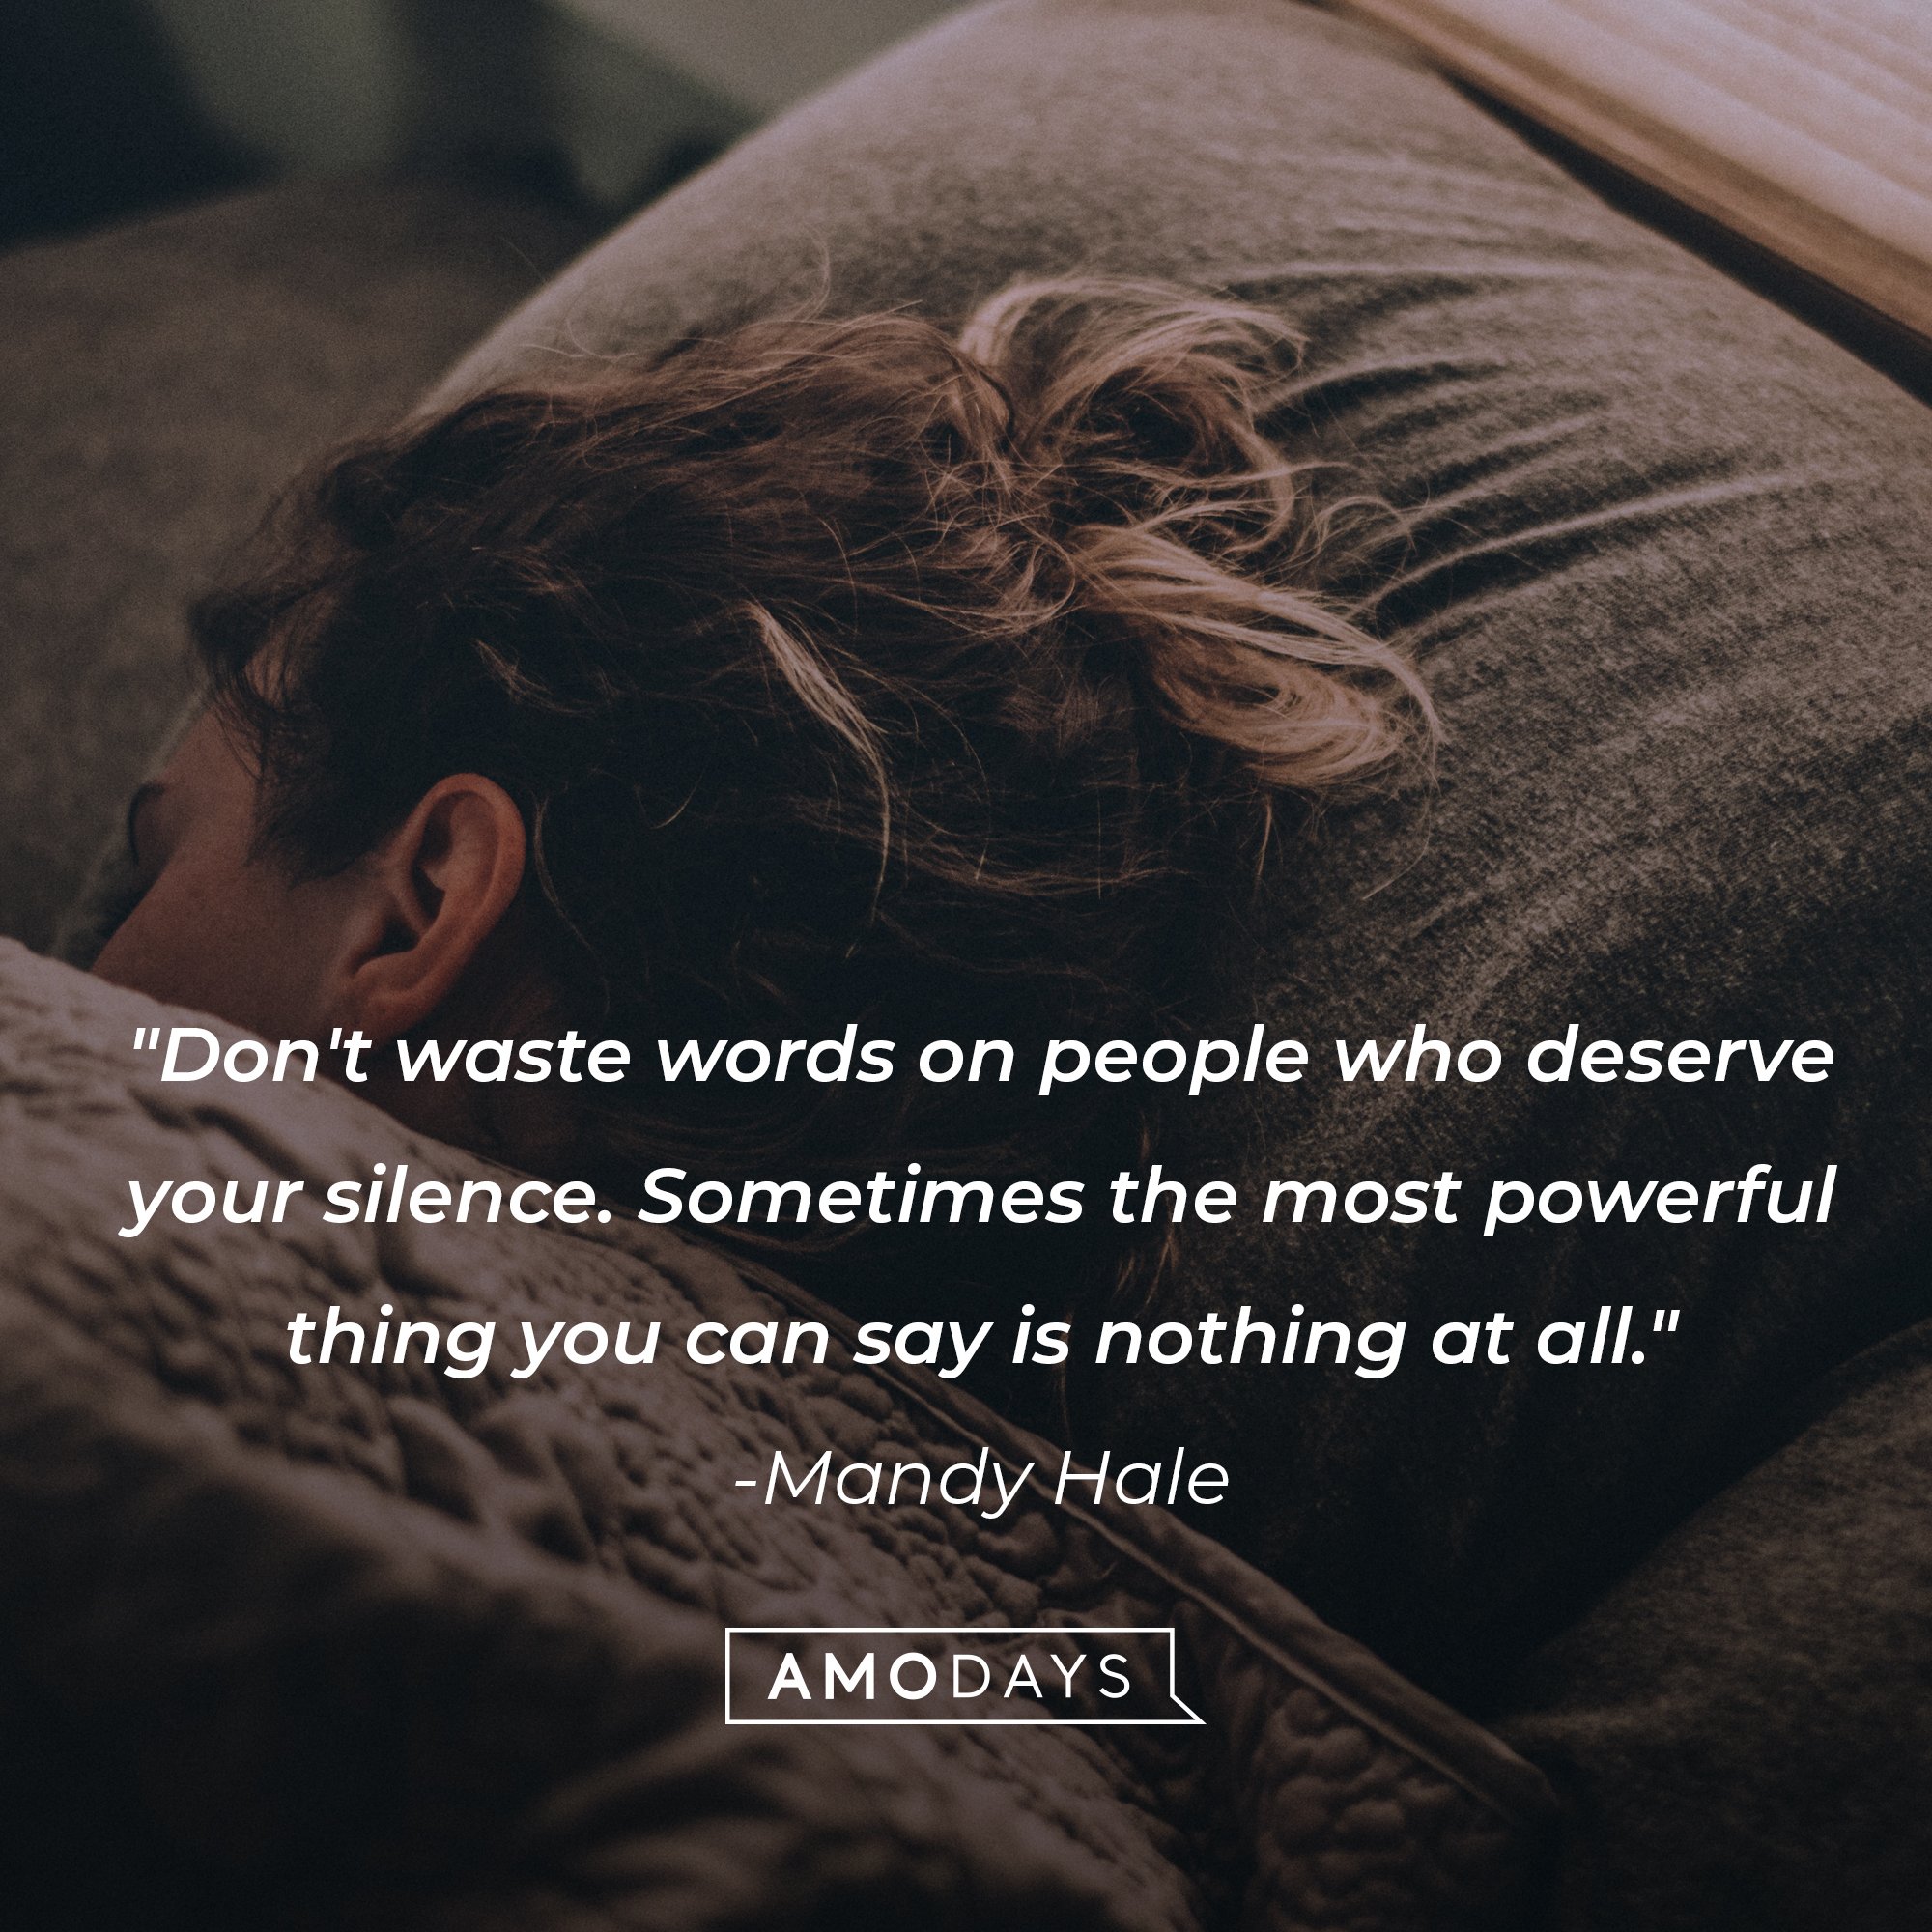 Mandy Hale’s quote: "Don't waste words on people who deserve your silence. Sometimes the most powerful thing you can say is nothing at all." | Image: AmoDays